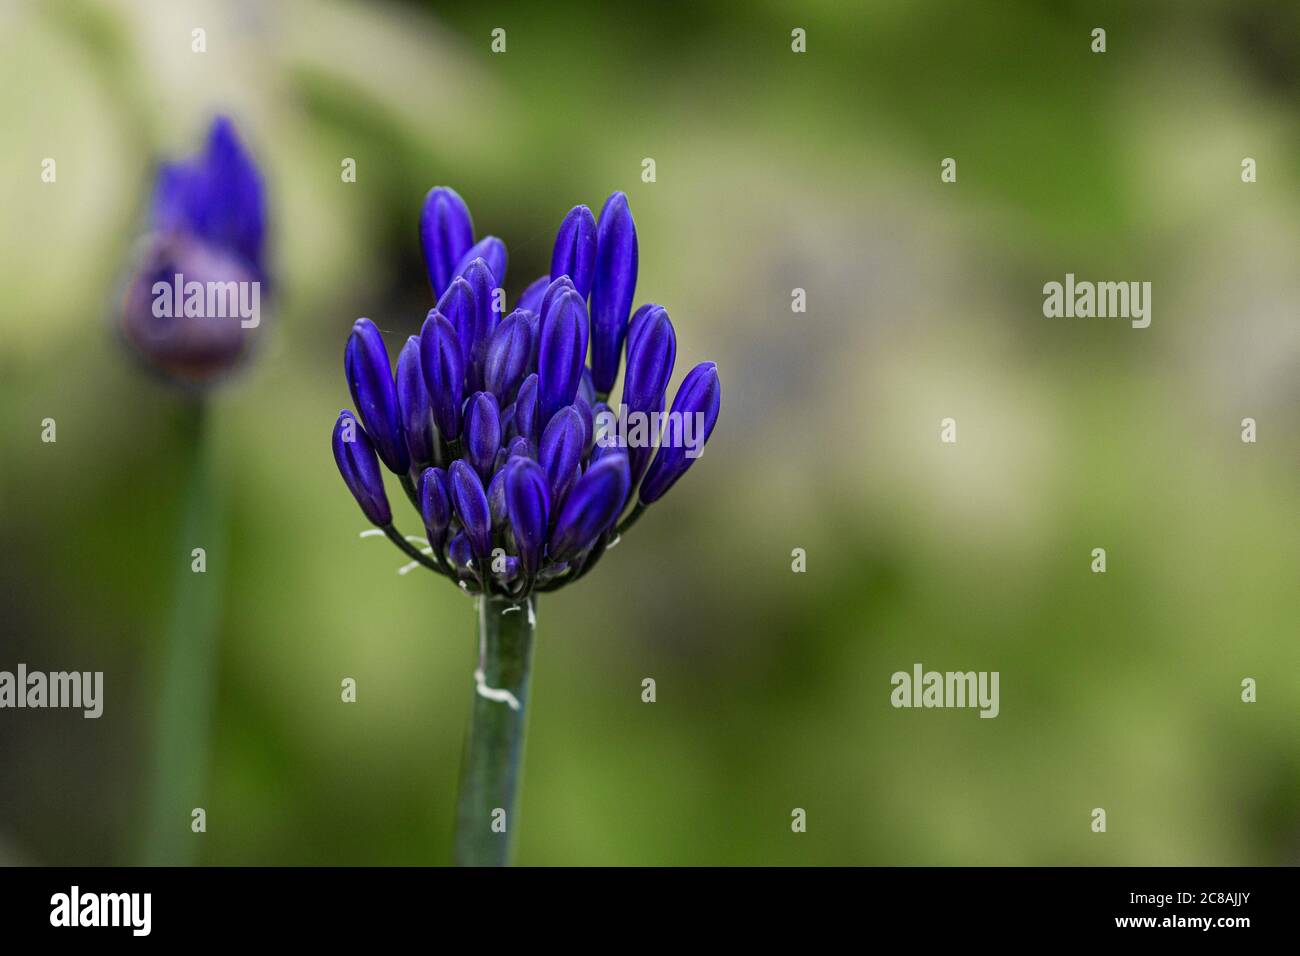 Agapanthus flower buds opening up. Stock Photo